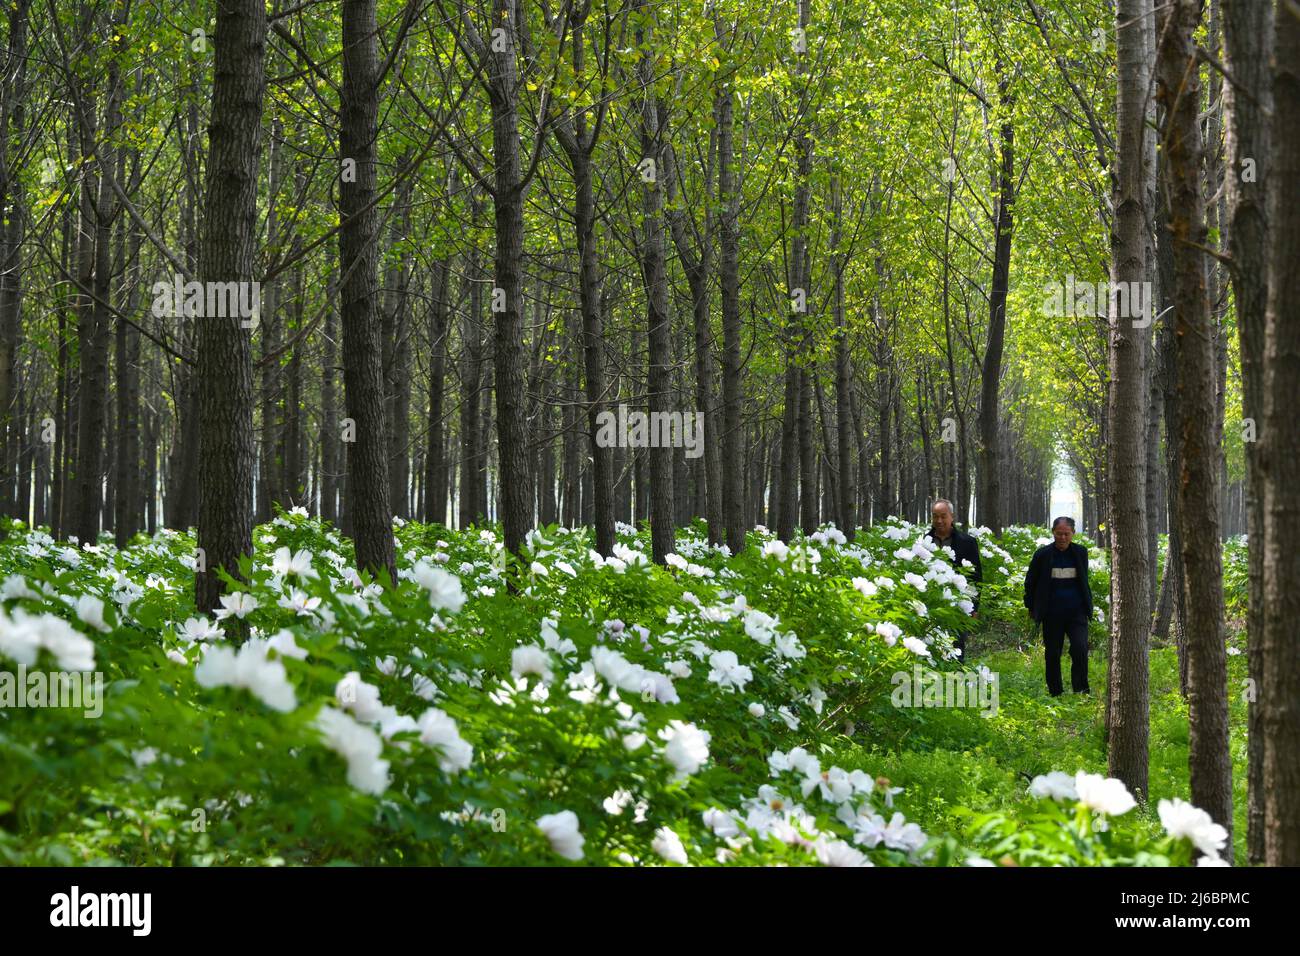 (220430) -- JINAN, April 30, 2022 (Xinhua) -- Farmers check the growth of peony flowers in the woods in Huangtun Village of Heze City, east China's Shandong Province, April 15, 2022. (Xinhua/Zhu Zheng) Stock Photo